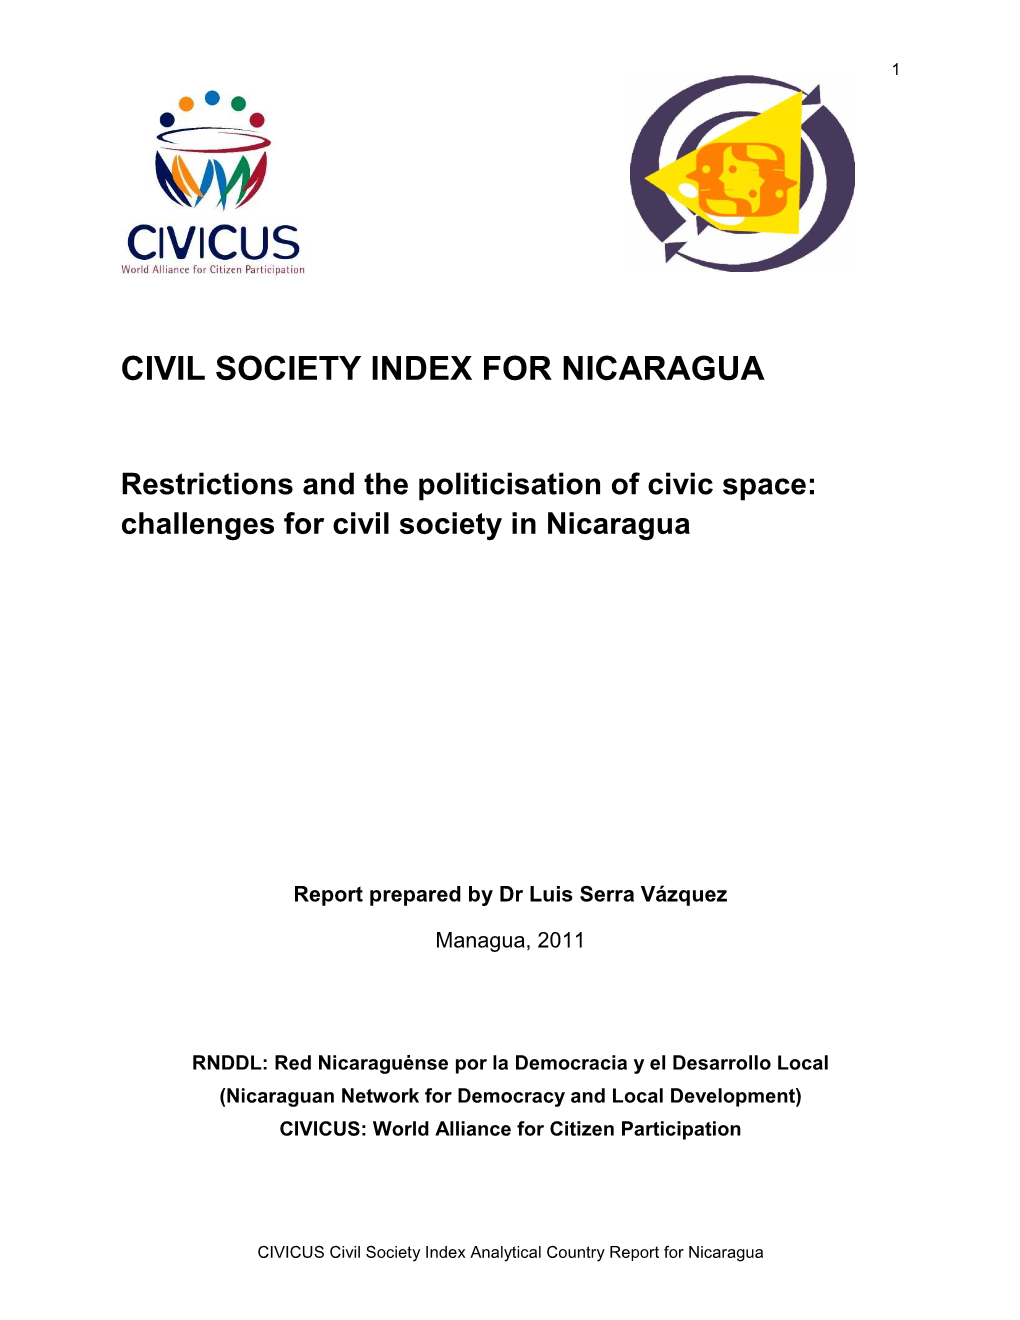 Civil Society Index for Nicaragua